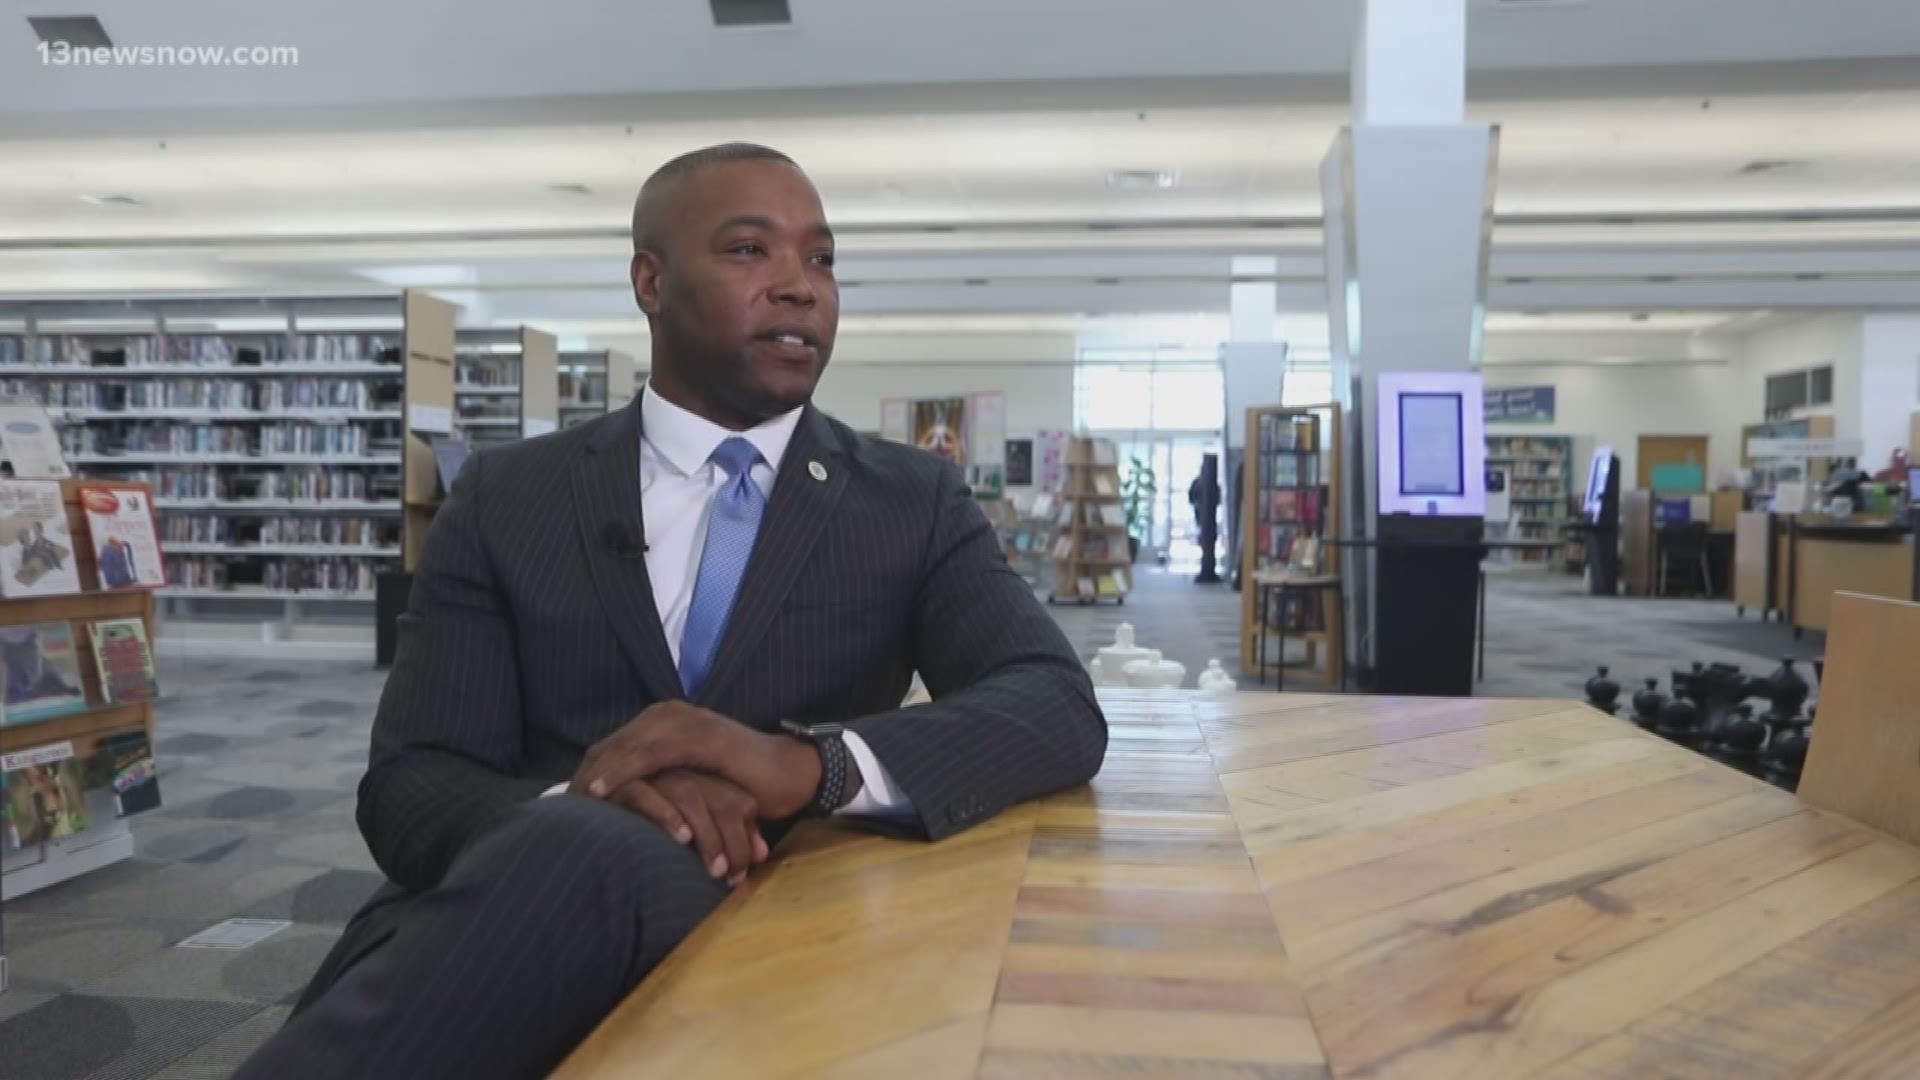 Aaron Rouse said he'll run for city council's top spot in November against incumbent Mayor Bobby Dyer. Rouse, a former NFL player, was elected to council in 2018.